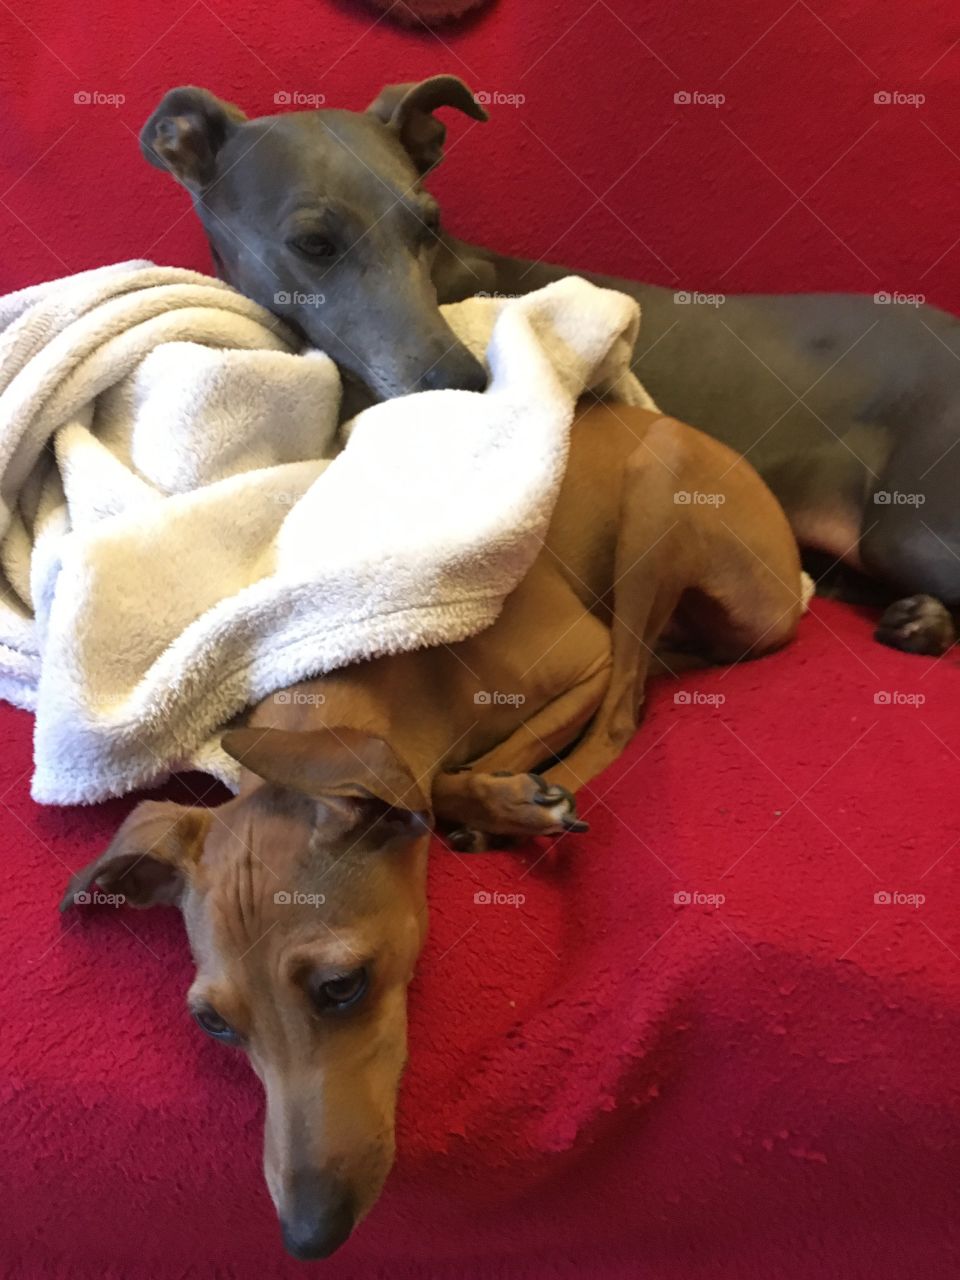 Libby the blue whippet and Amber the fawn Italian greyhound relaxing together, laid on the sofa with white and red blankets 